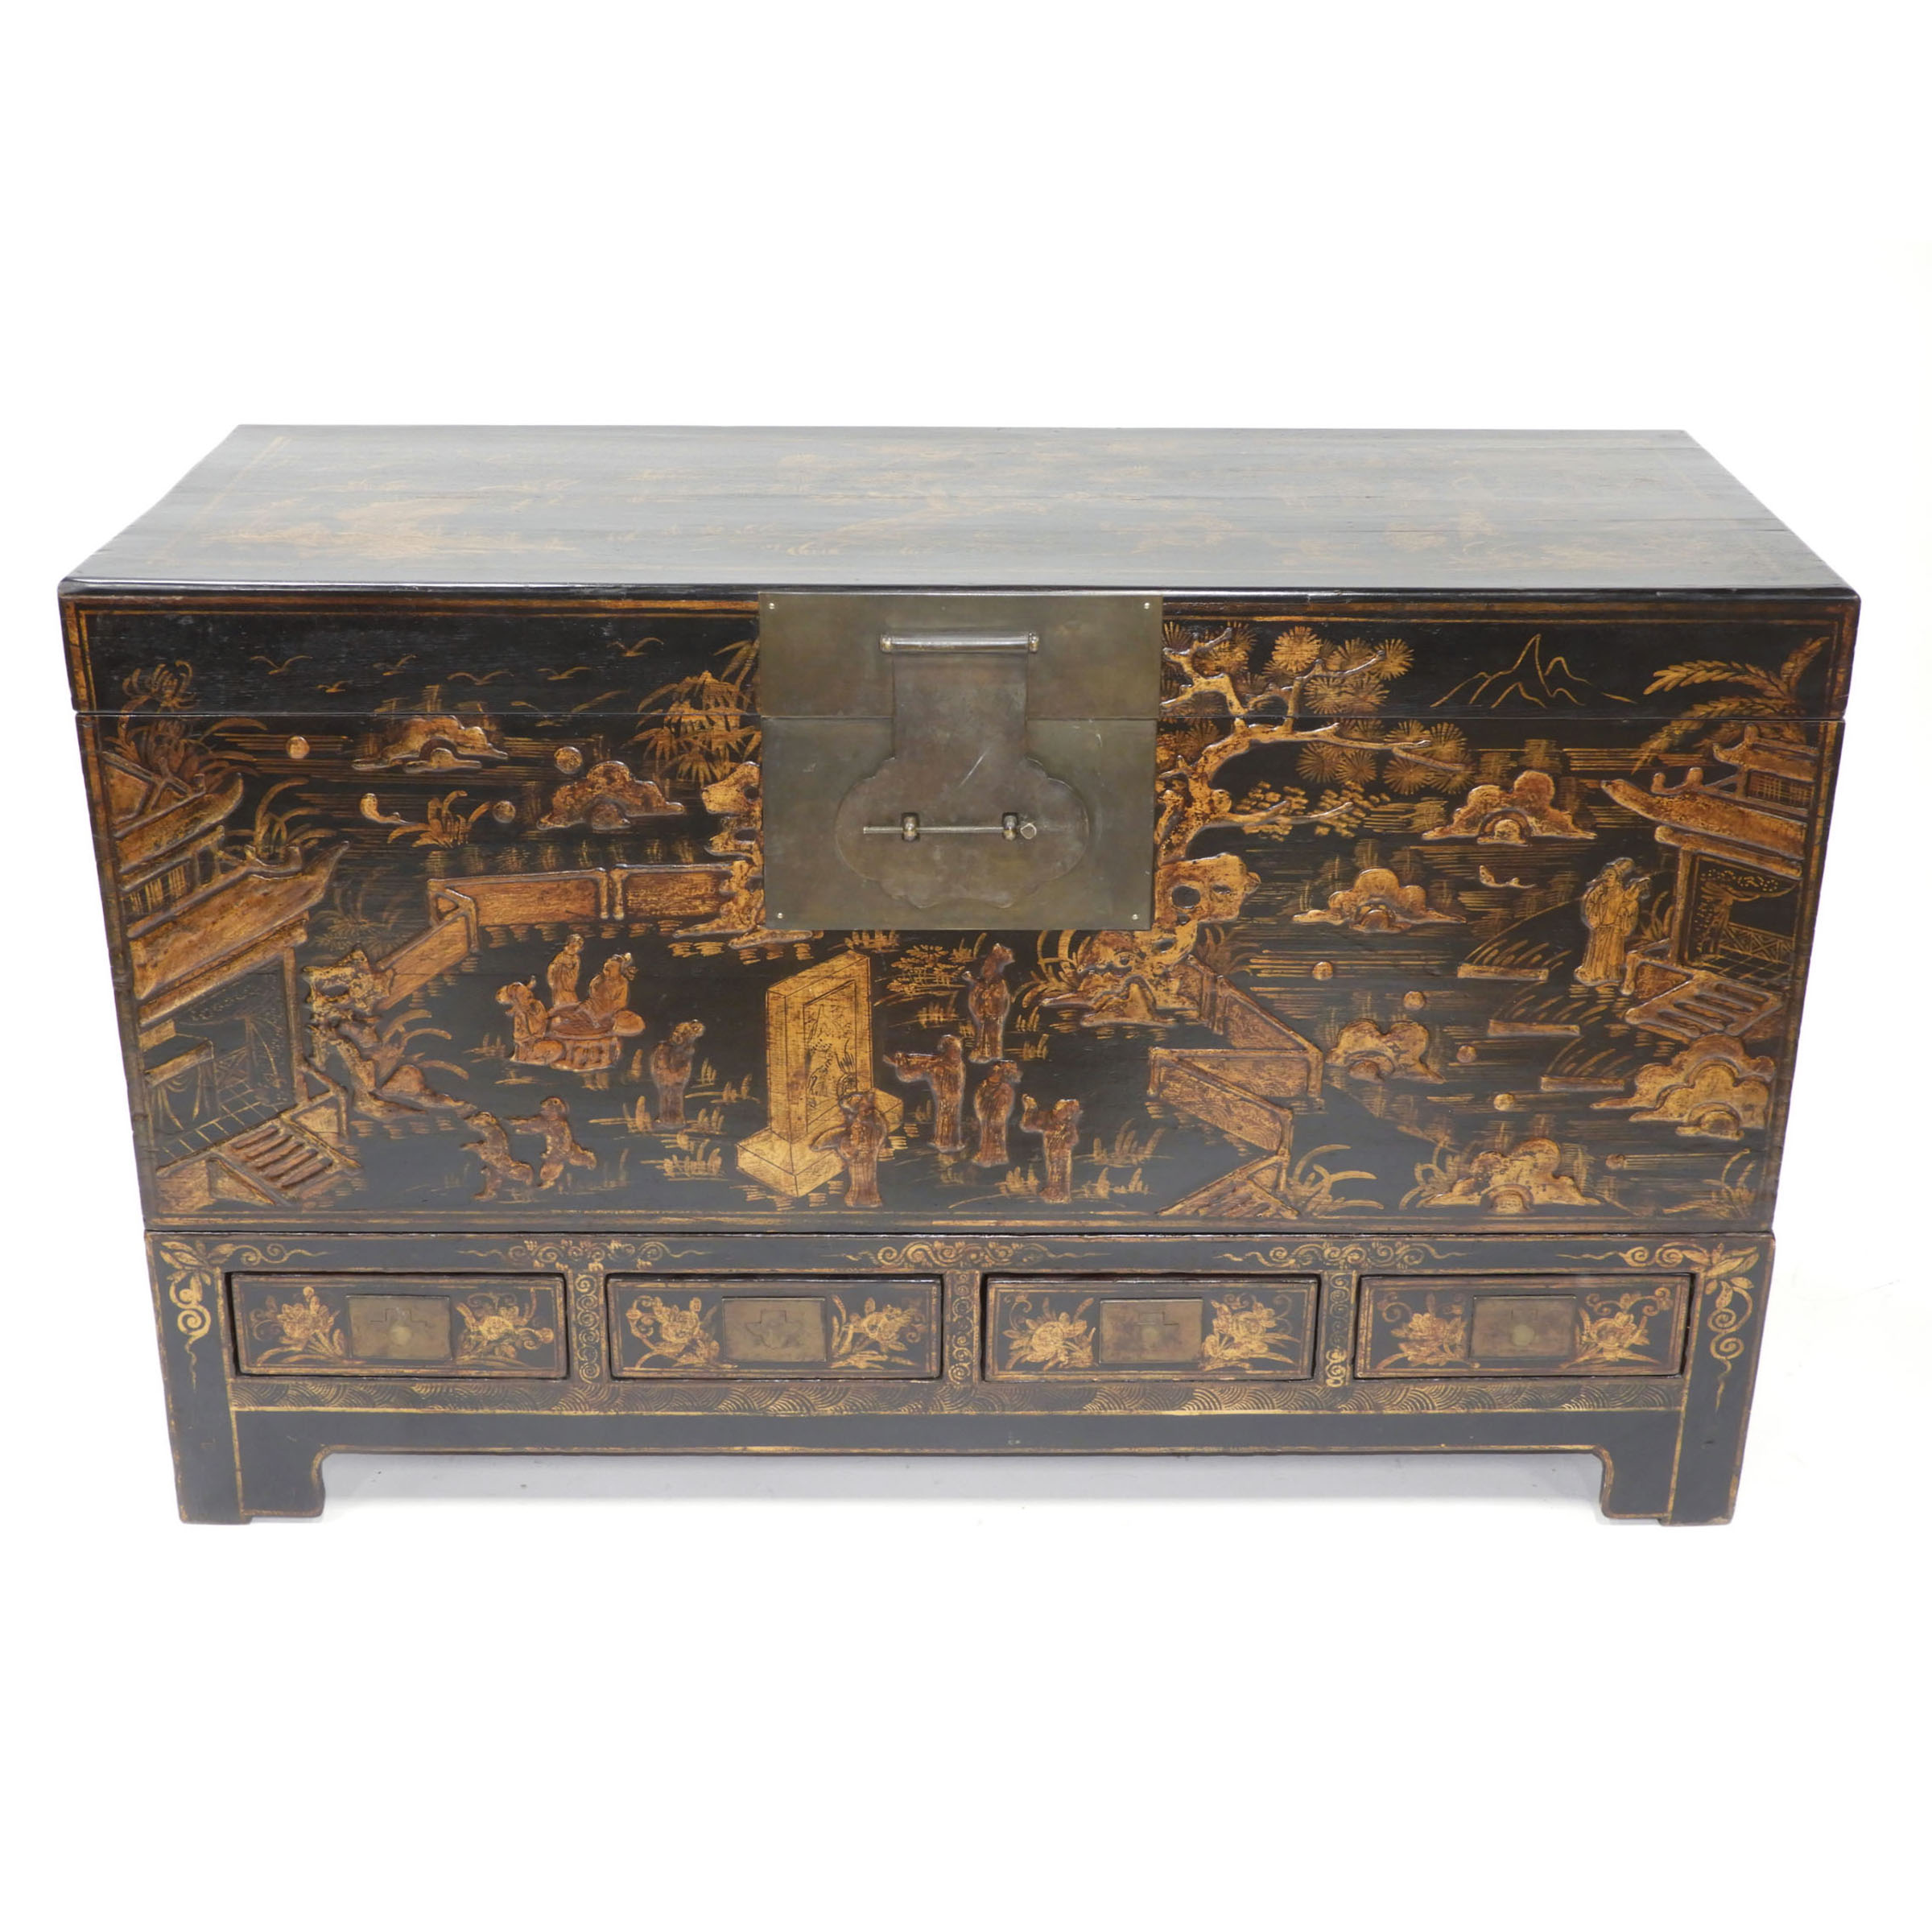 A Large Chinese Gilt and Black Lacquer Storage Chest, Early to Mid 20th Century